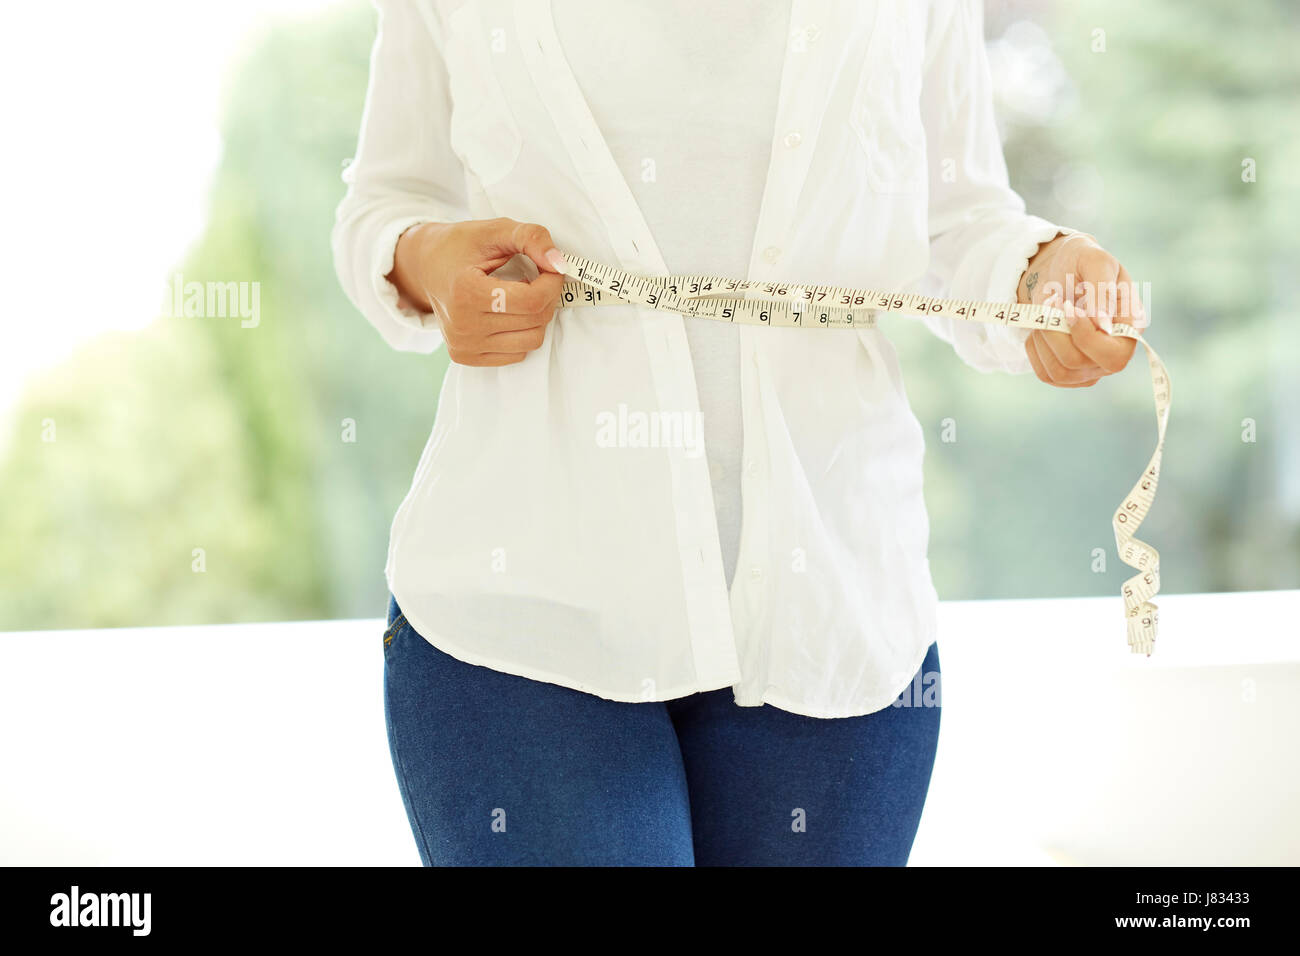 Slim Young Woman Measuring Her Waist Tape Measure Stock Photo by ©Maksymiv  200537188